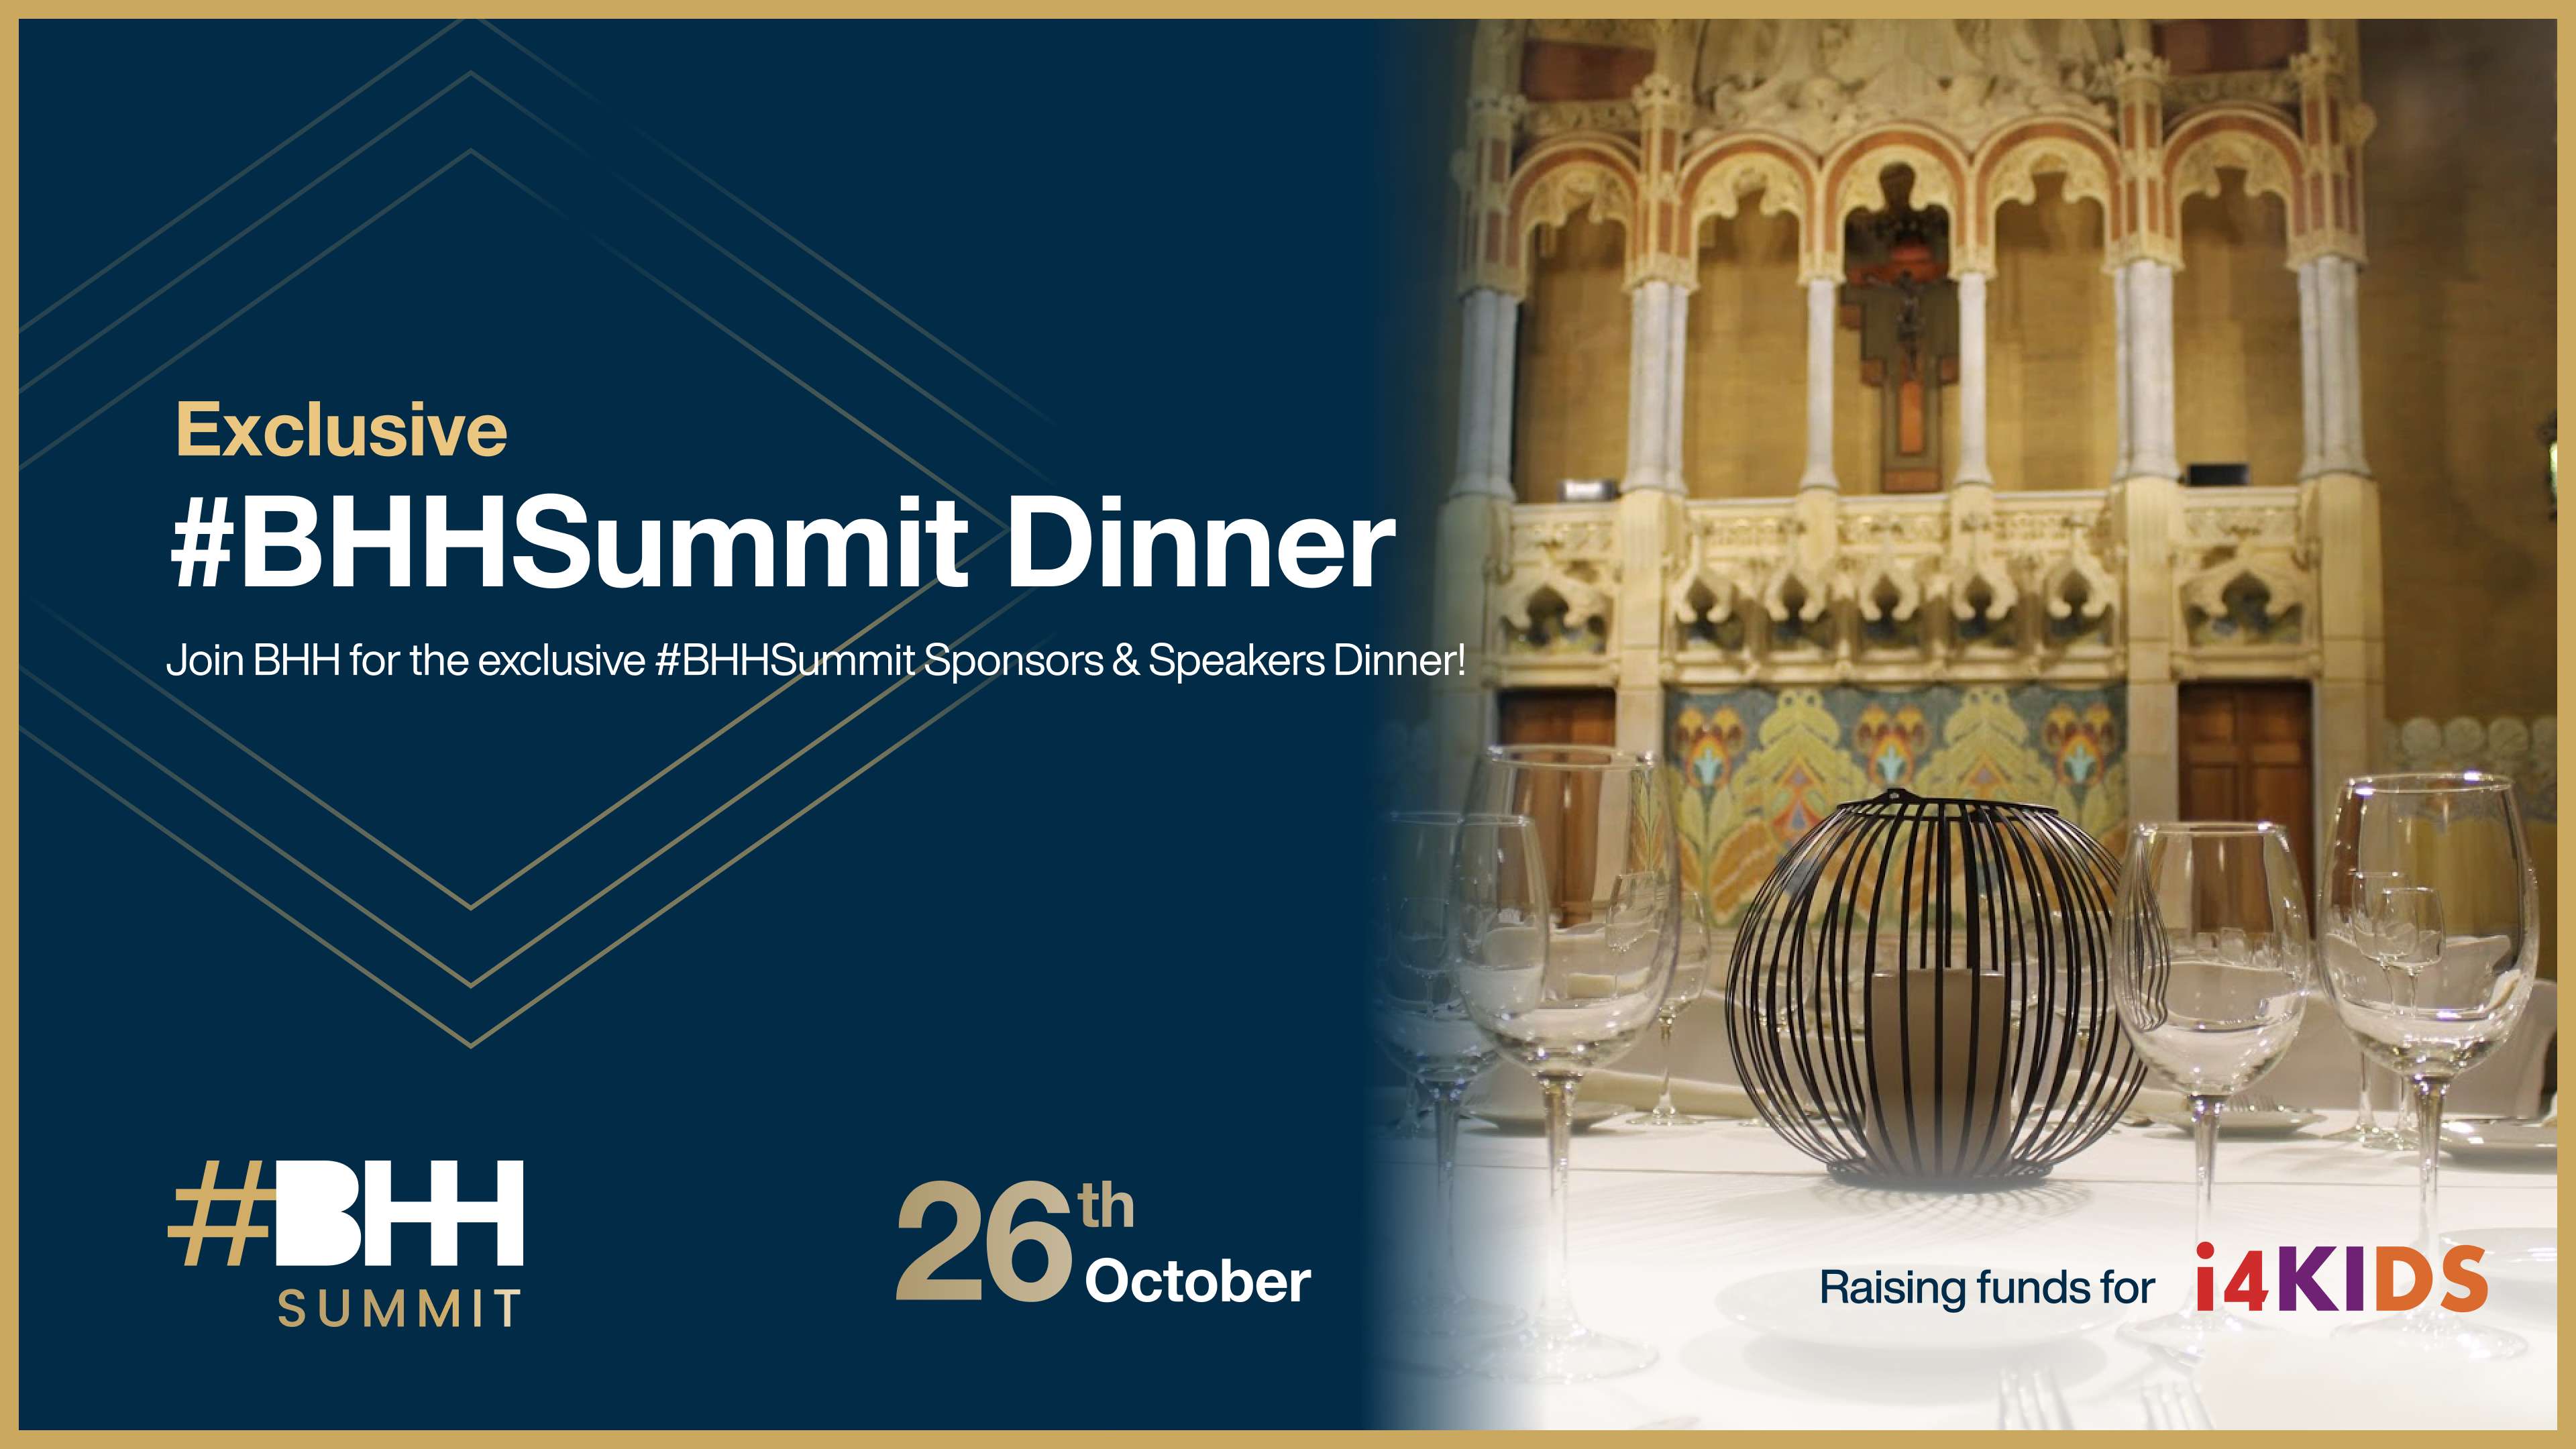 Join the exclusive #BHHSummit Dinner